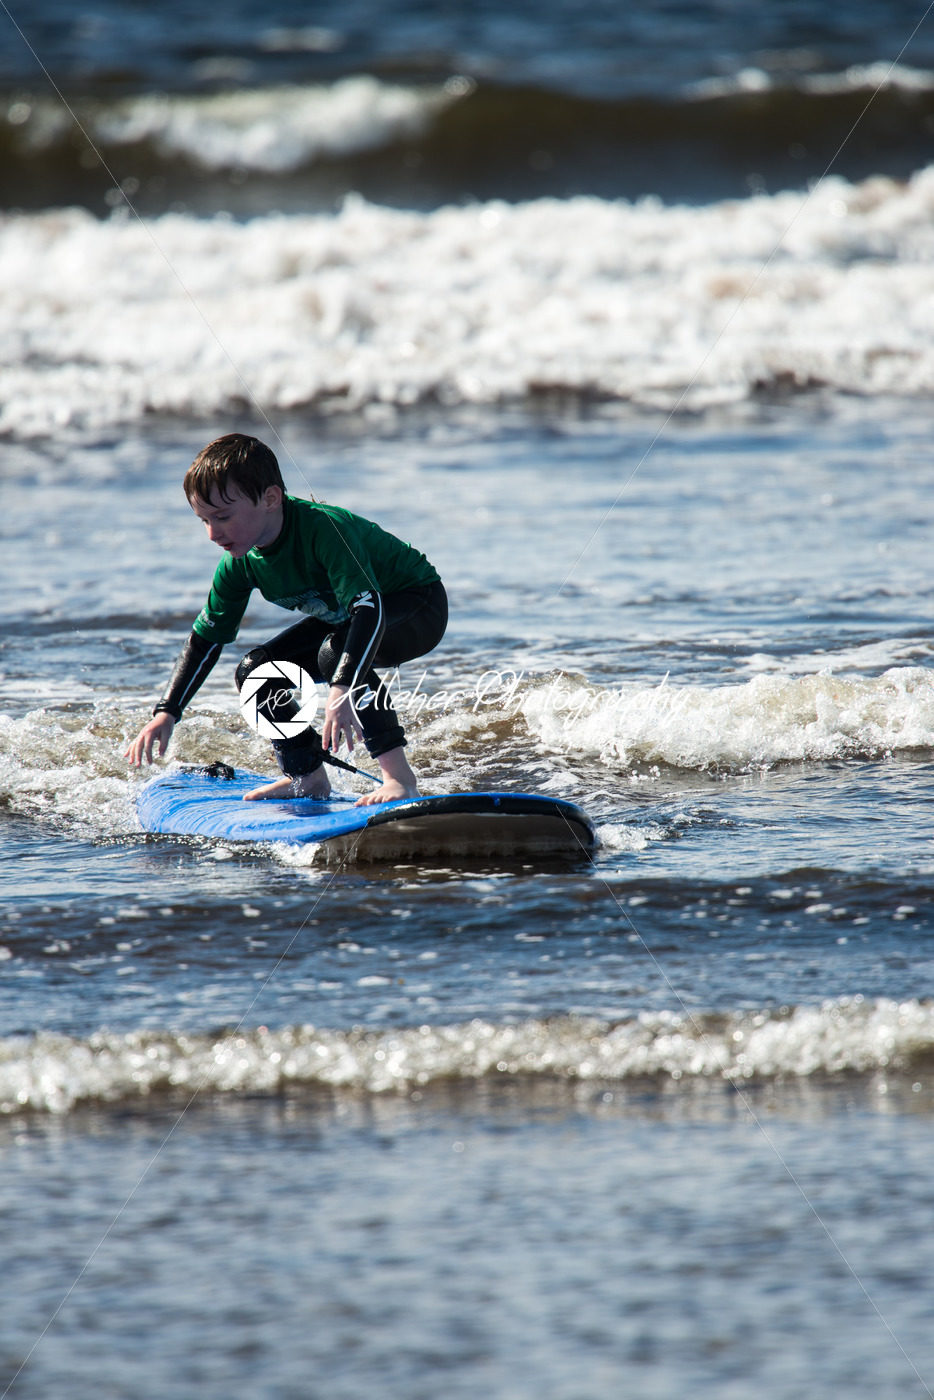 Young little boy on beach taking surfing lessons - Kelleher Photography Store